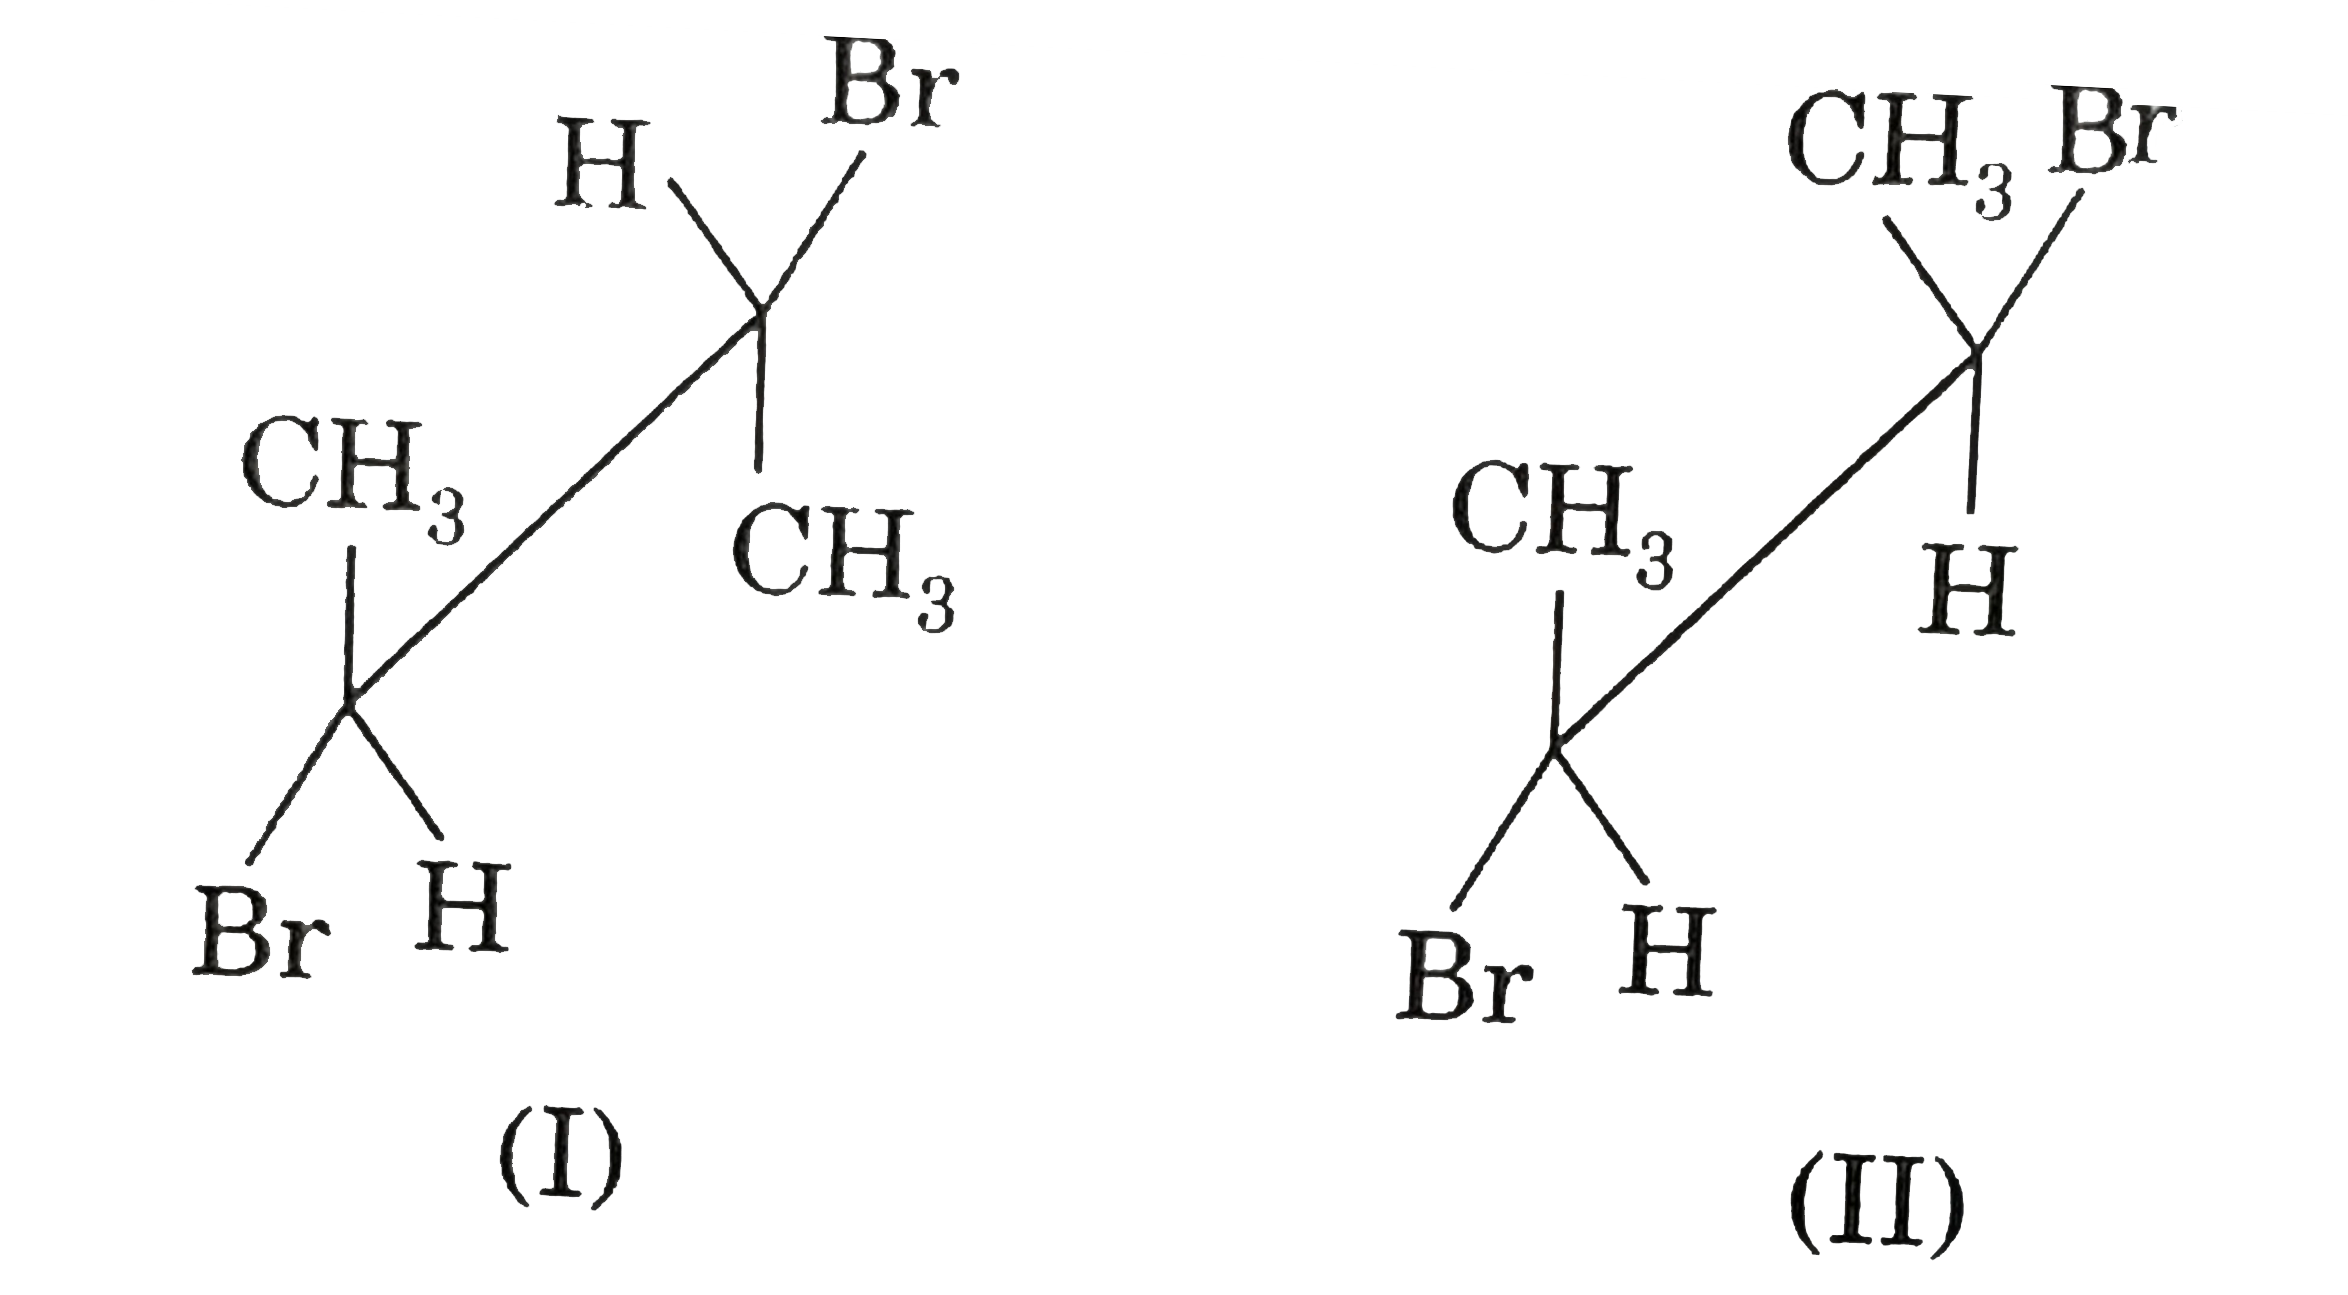 The structures shown here are related as being